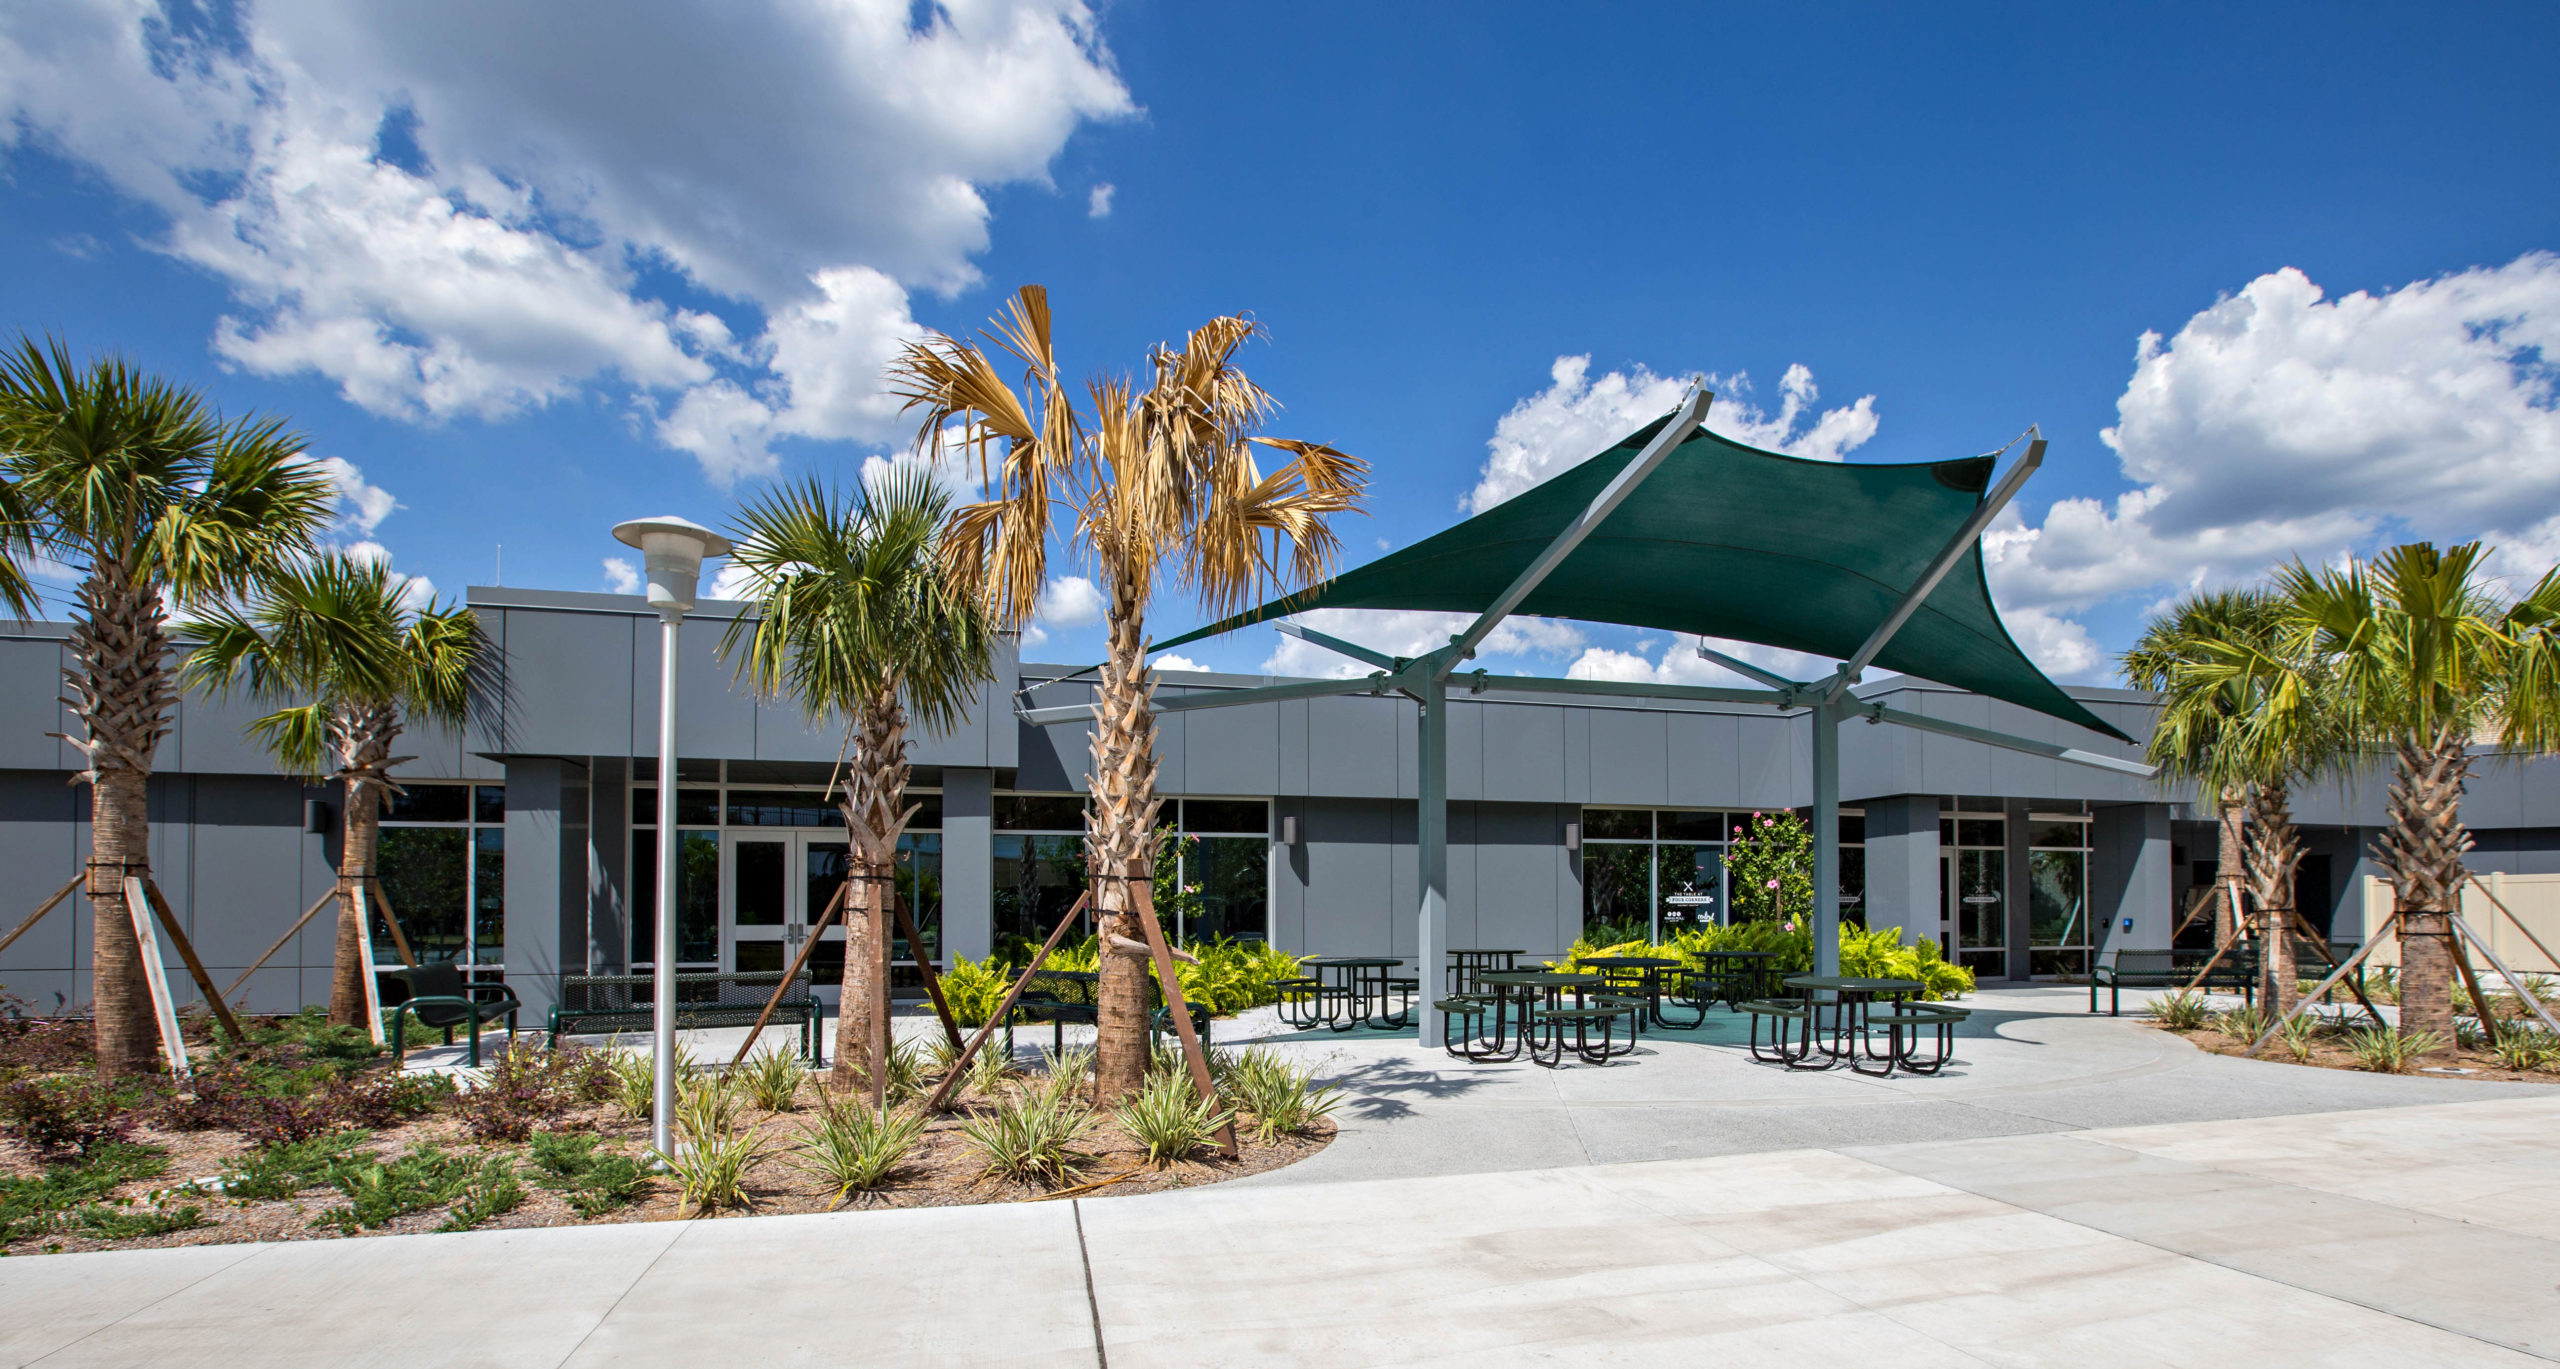 GO to University of South Florida Health Student Center, MDA Building Renovations